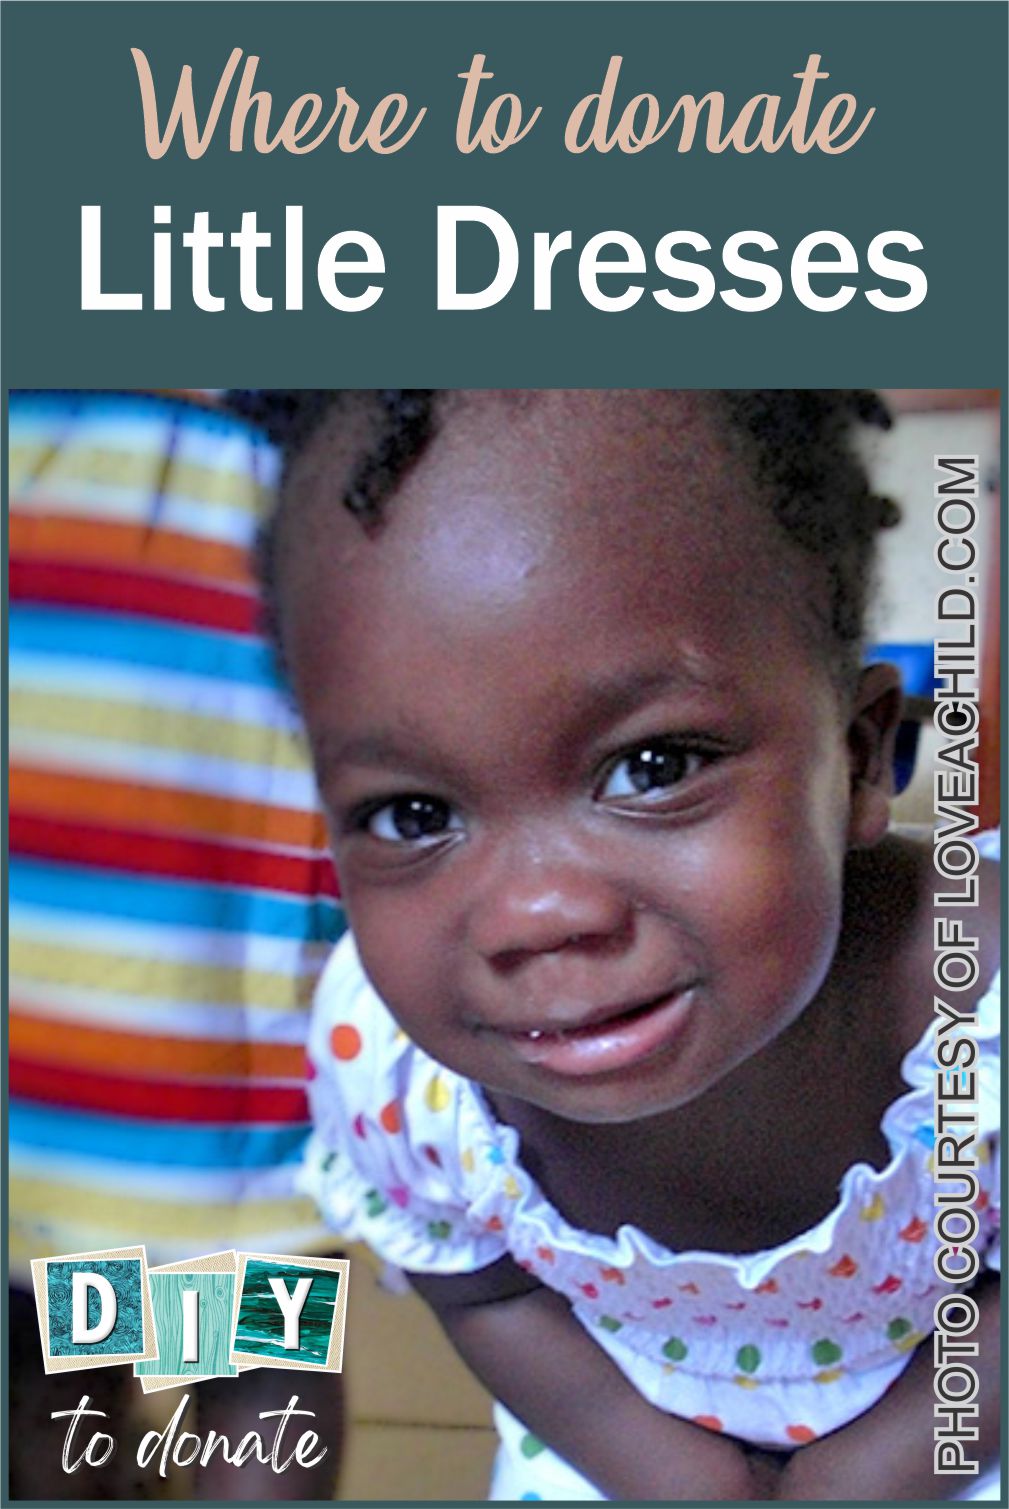 Our list of national and international organizations that accept homemade little dresses for girls and shorts for boys. Pick your favorite. #diytodonate #diy #diydresses #donation #donatedresses #handmade #handmadedresses #wheretodonate #donate #dresses #shorts #donateshorts